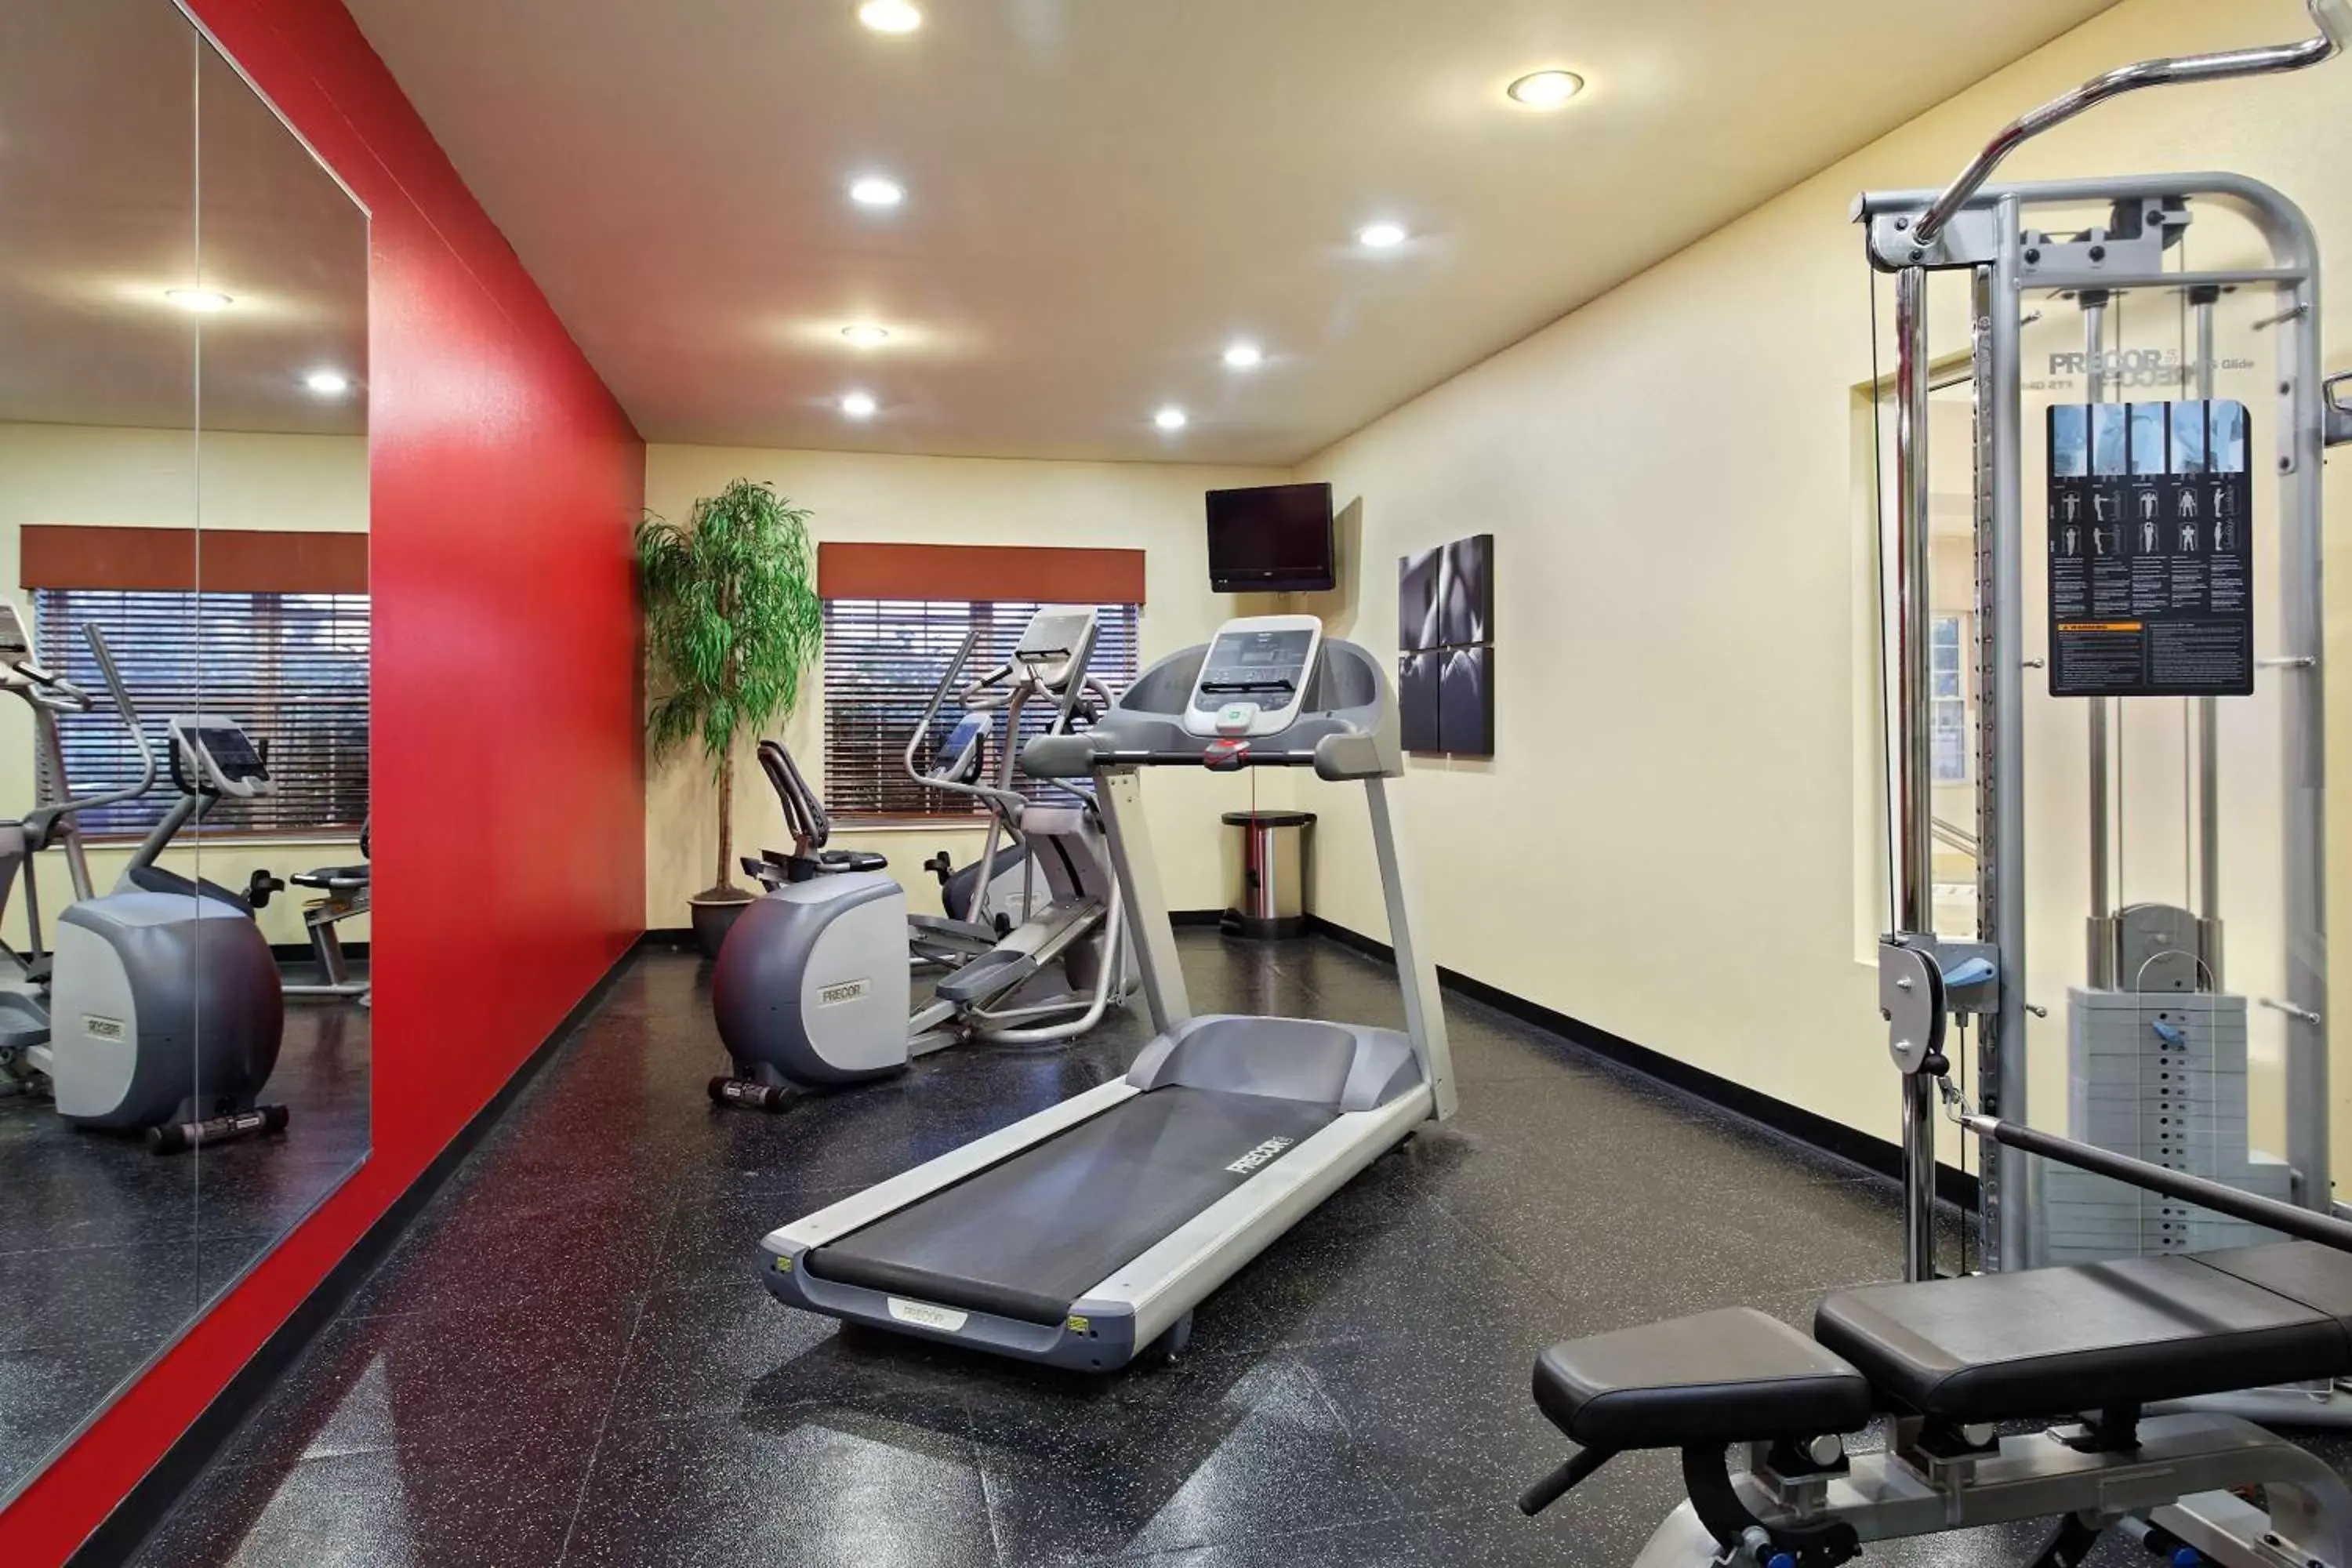 Activities, Fitness Center/Facilities in Country Inn & Suites by Radisson, Elgin, IL